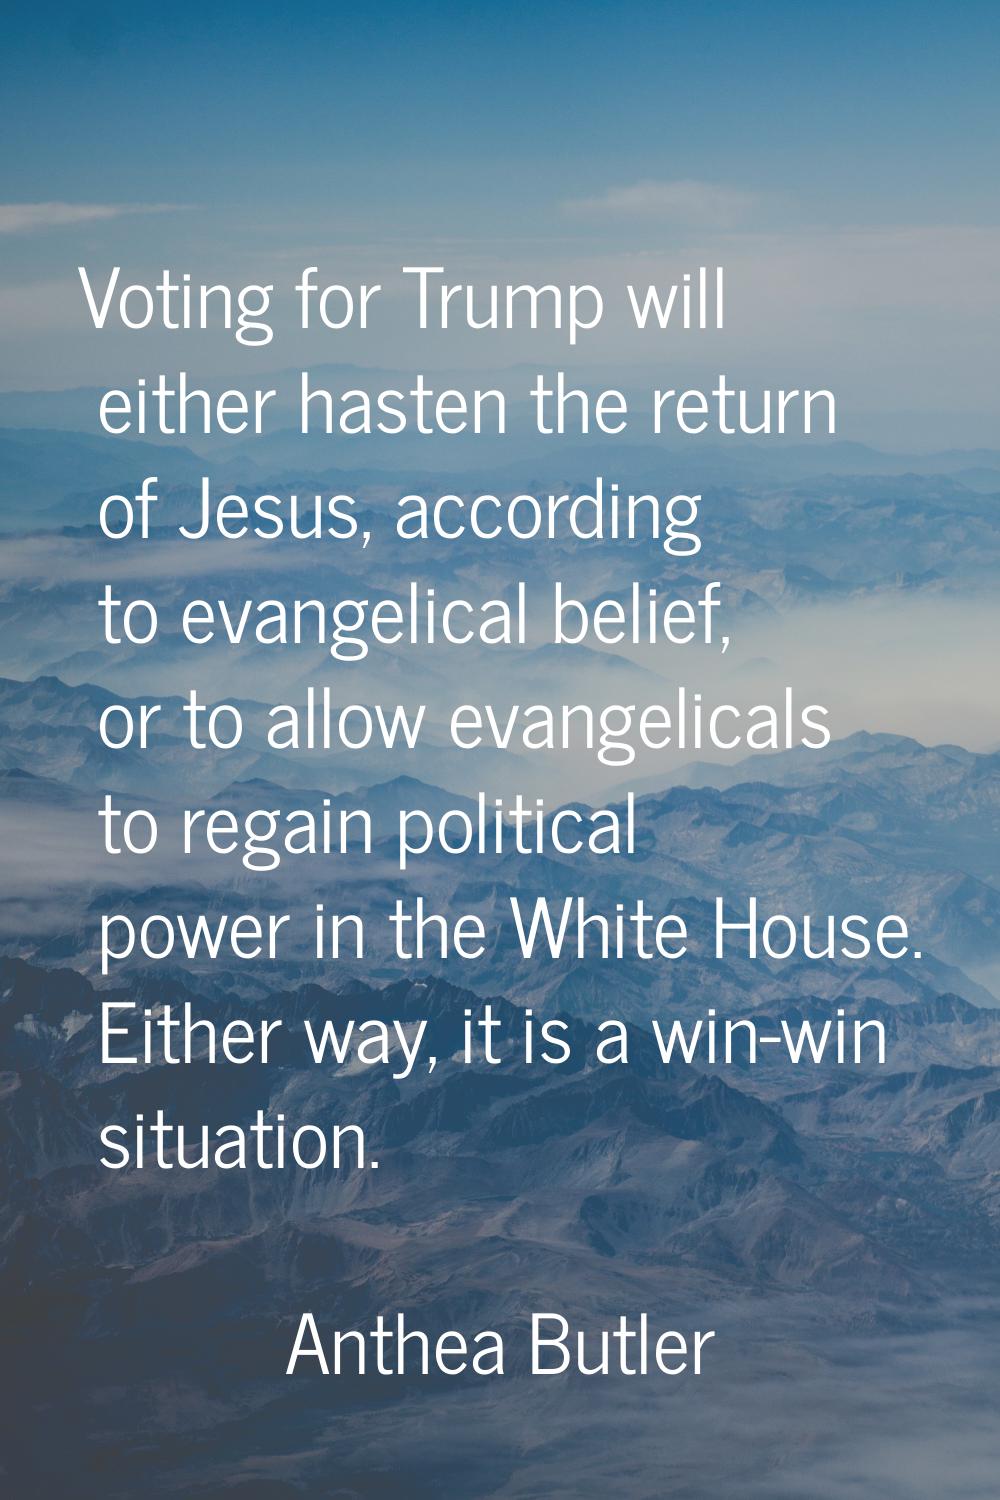 Voting for Trump will either hasten the return of Jesus, according to evangelical belief, or to all